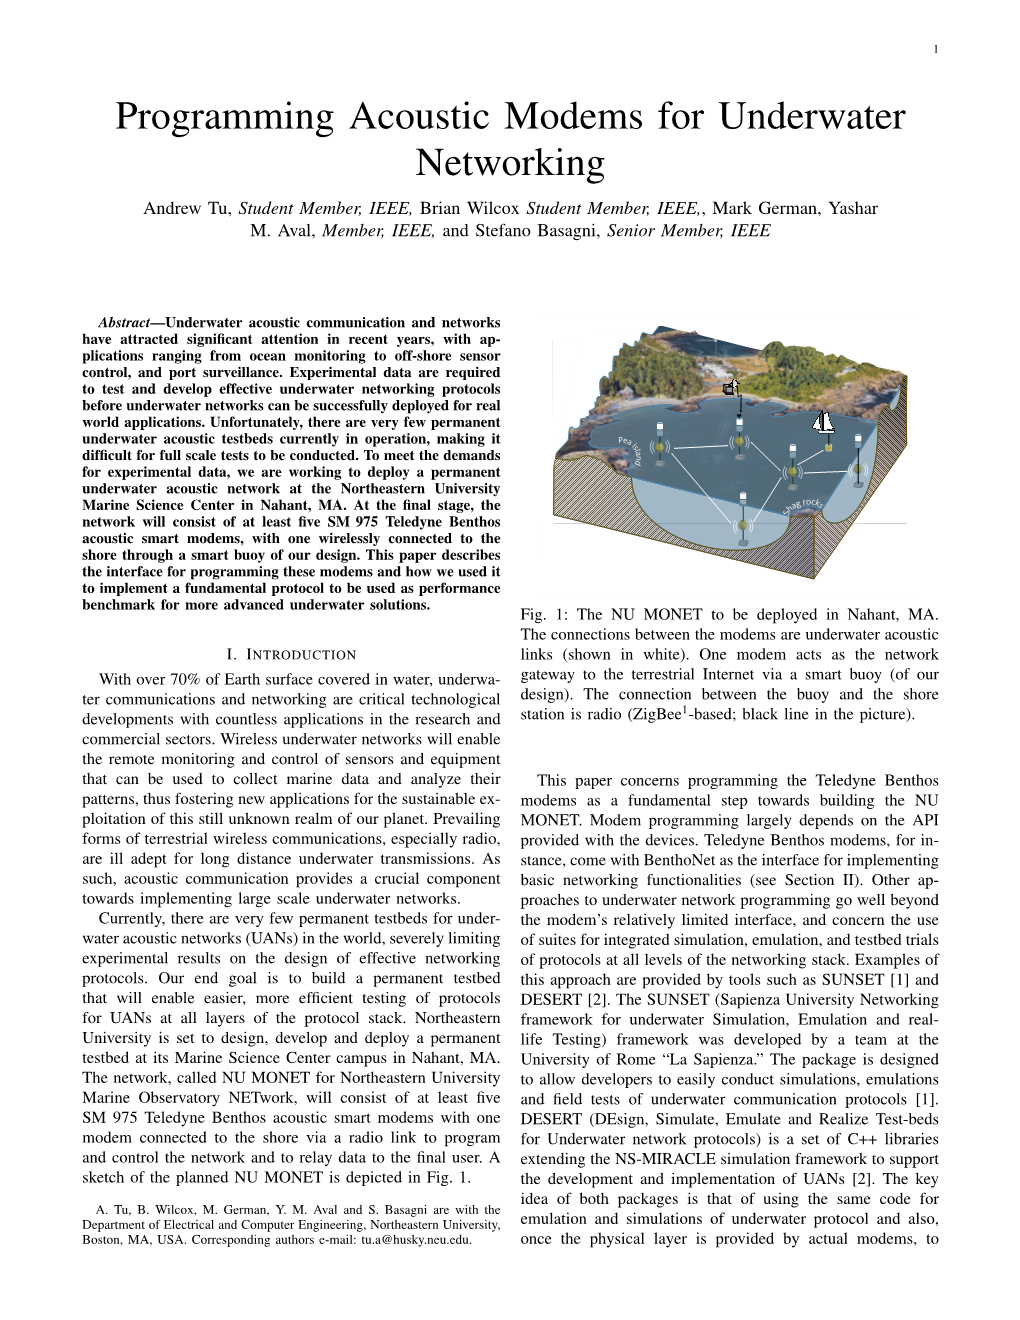 Programming Acoustic Modems for Underwater Networking